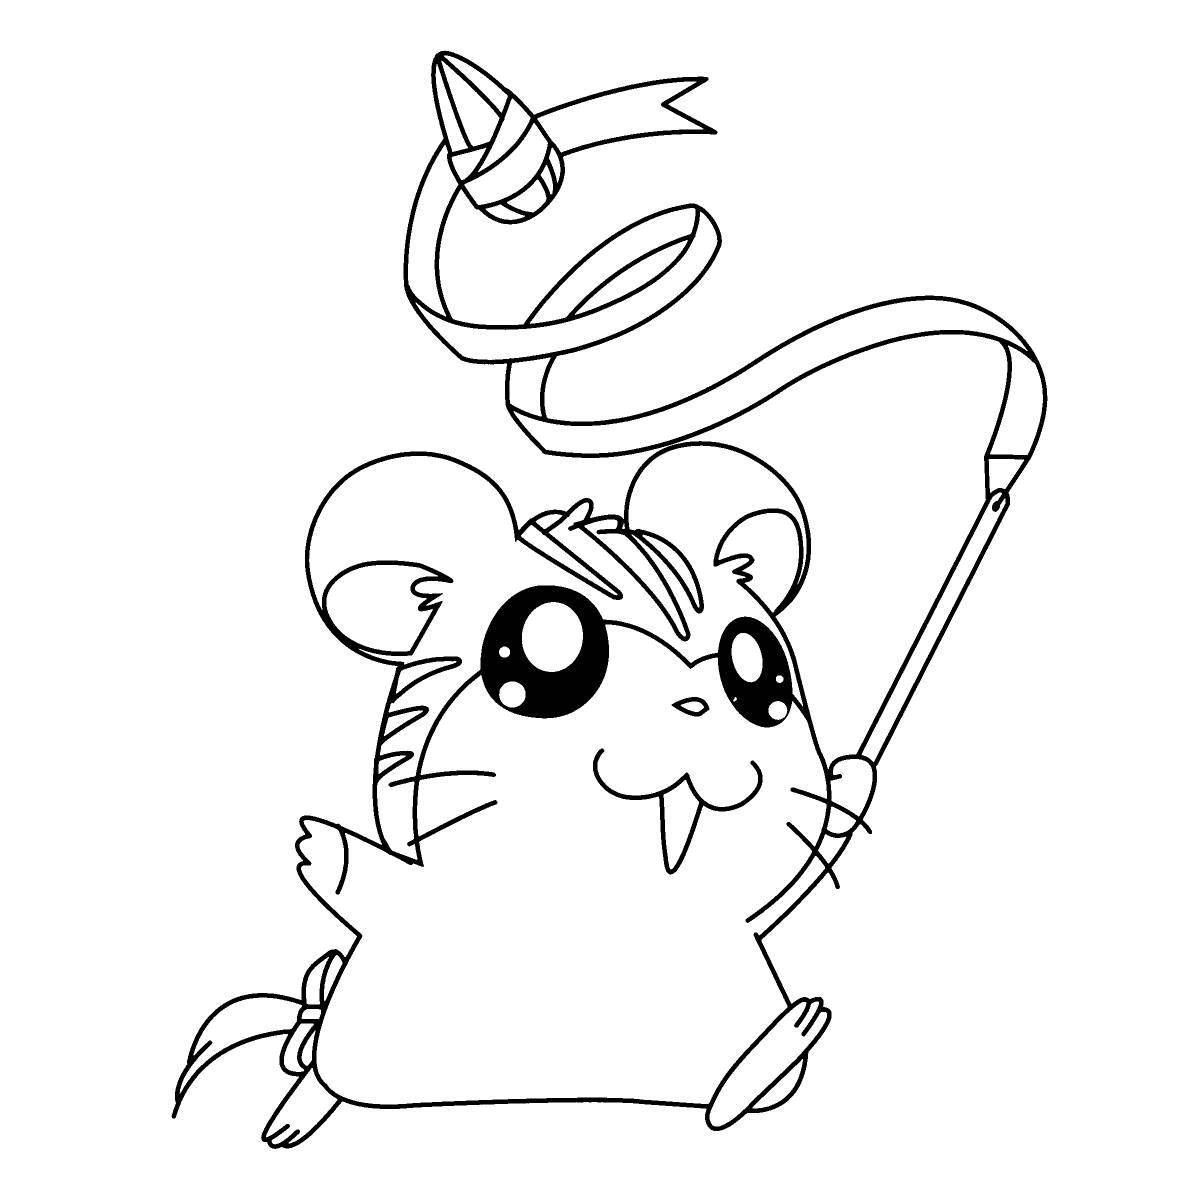 Sparkling mouse sausage coloring page